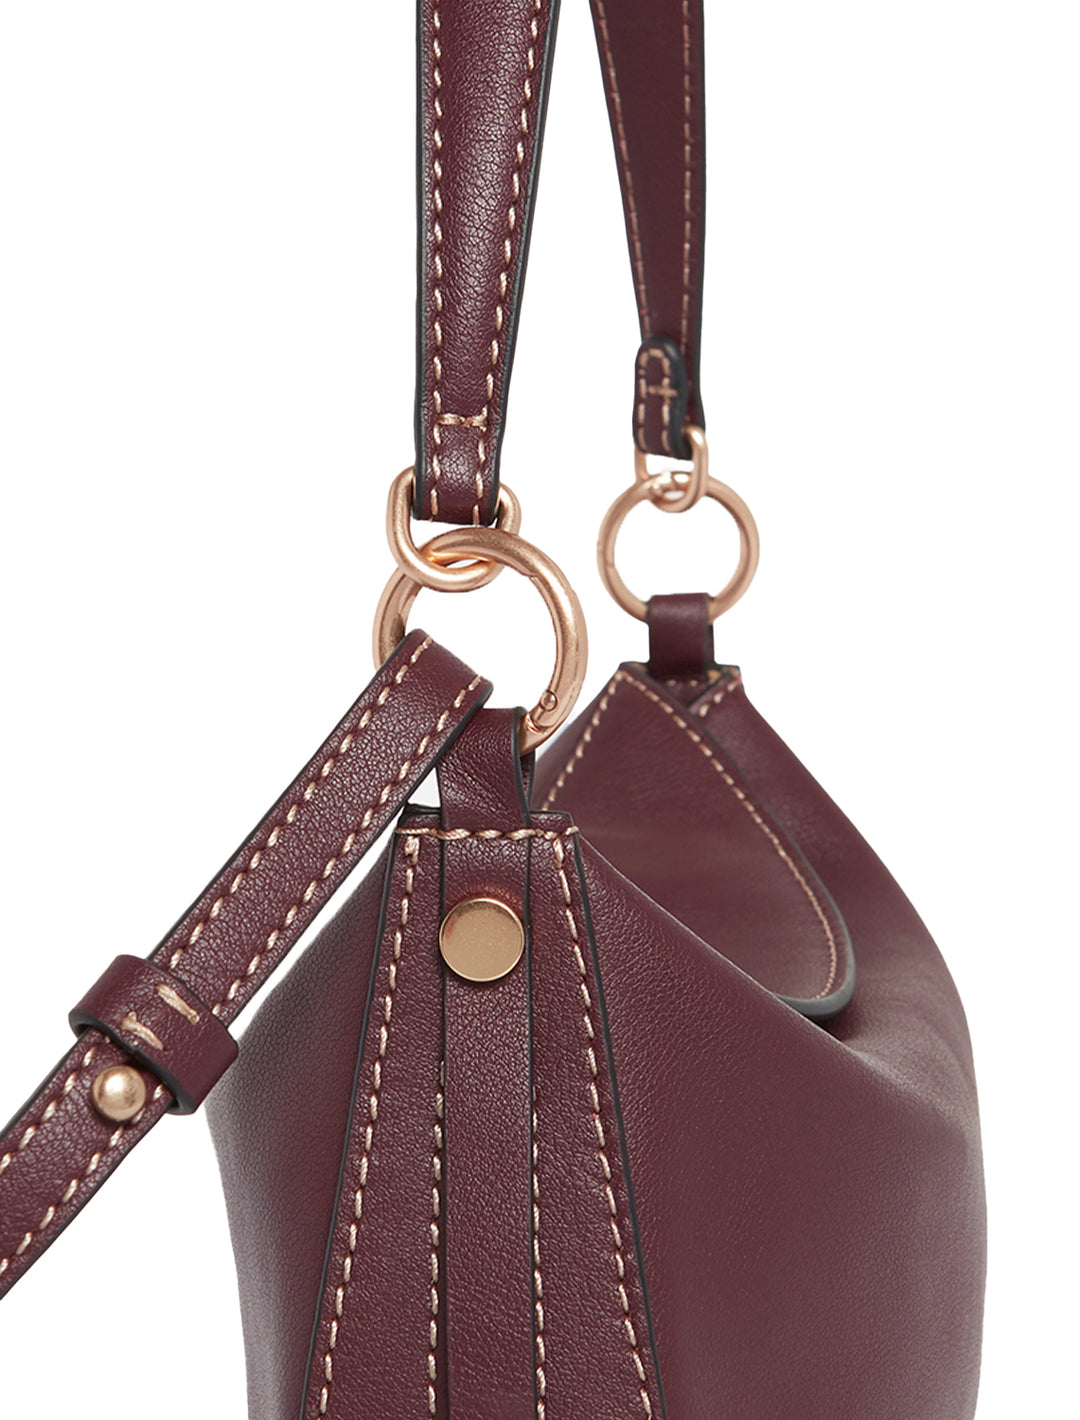 Close-up view of Vanessa Bruno's mini daily bag in bordeaux.